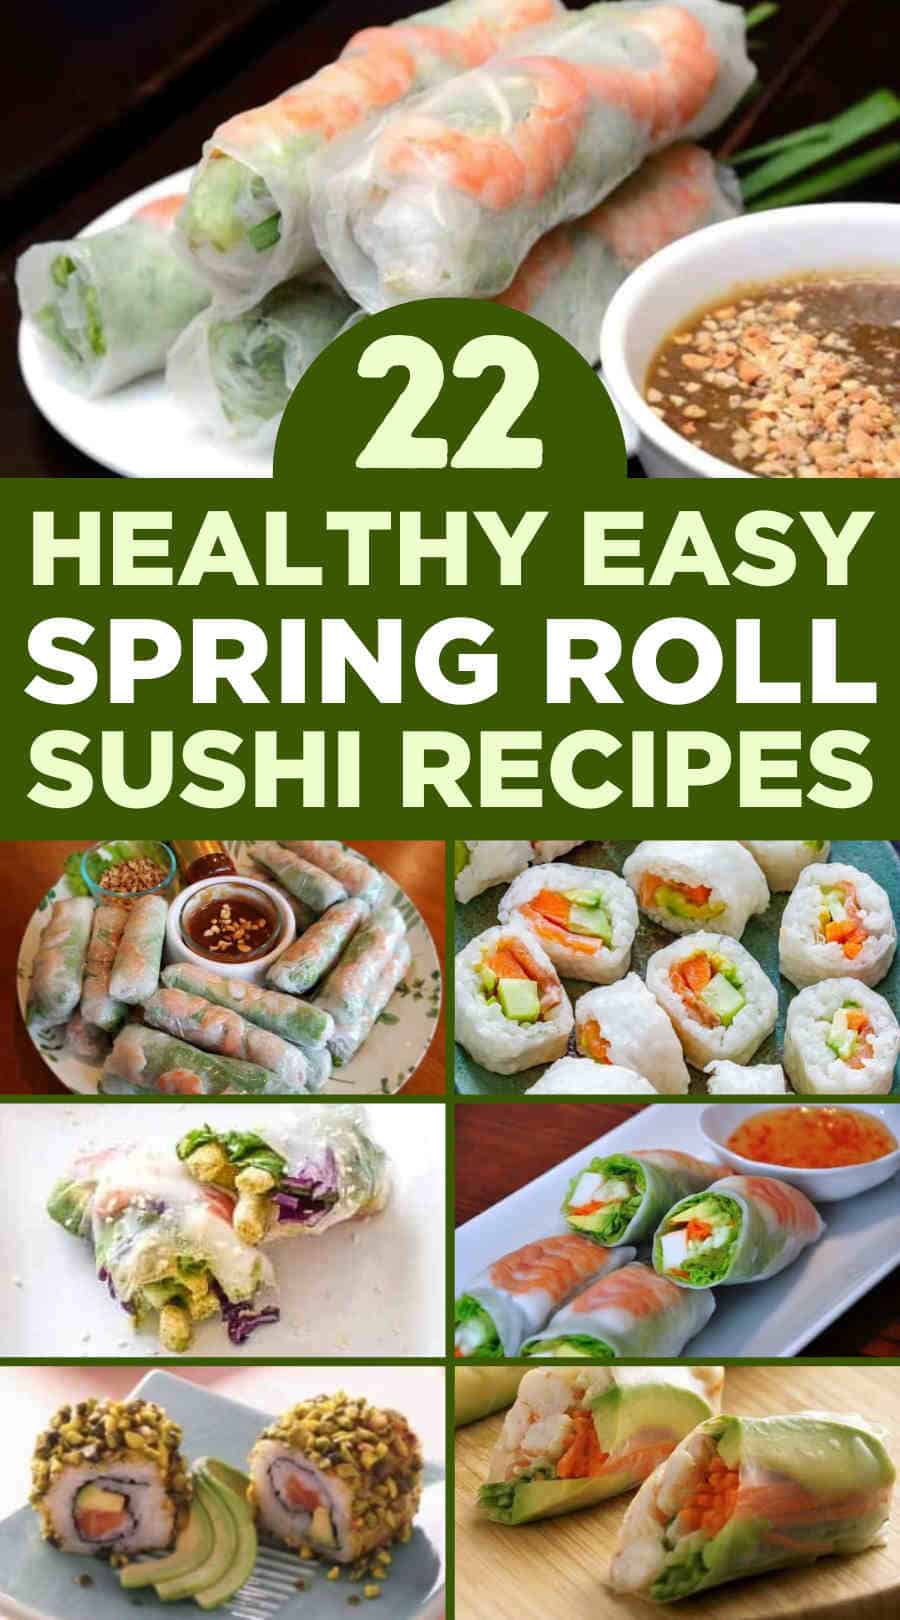 Best Spring Roll Sushi Recipes